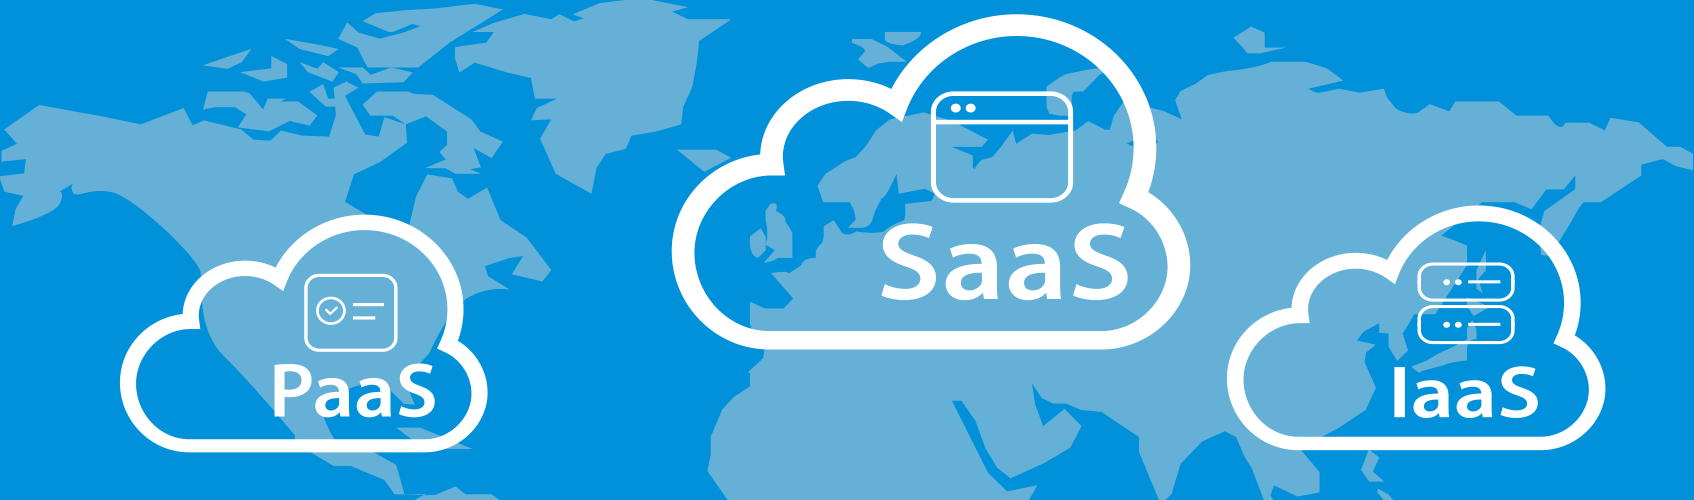 Paas Logo - Cloud Services Explained: SaaS, IaaS and PaaS Definitions & Background